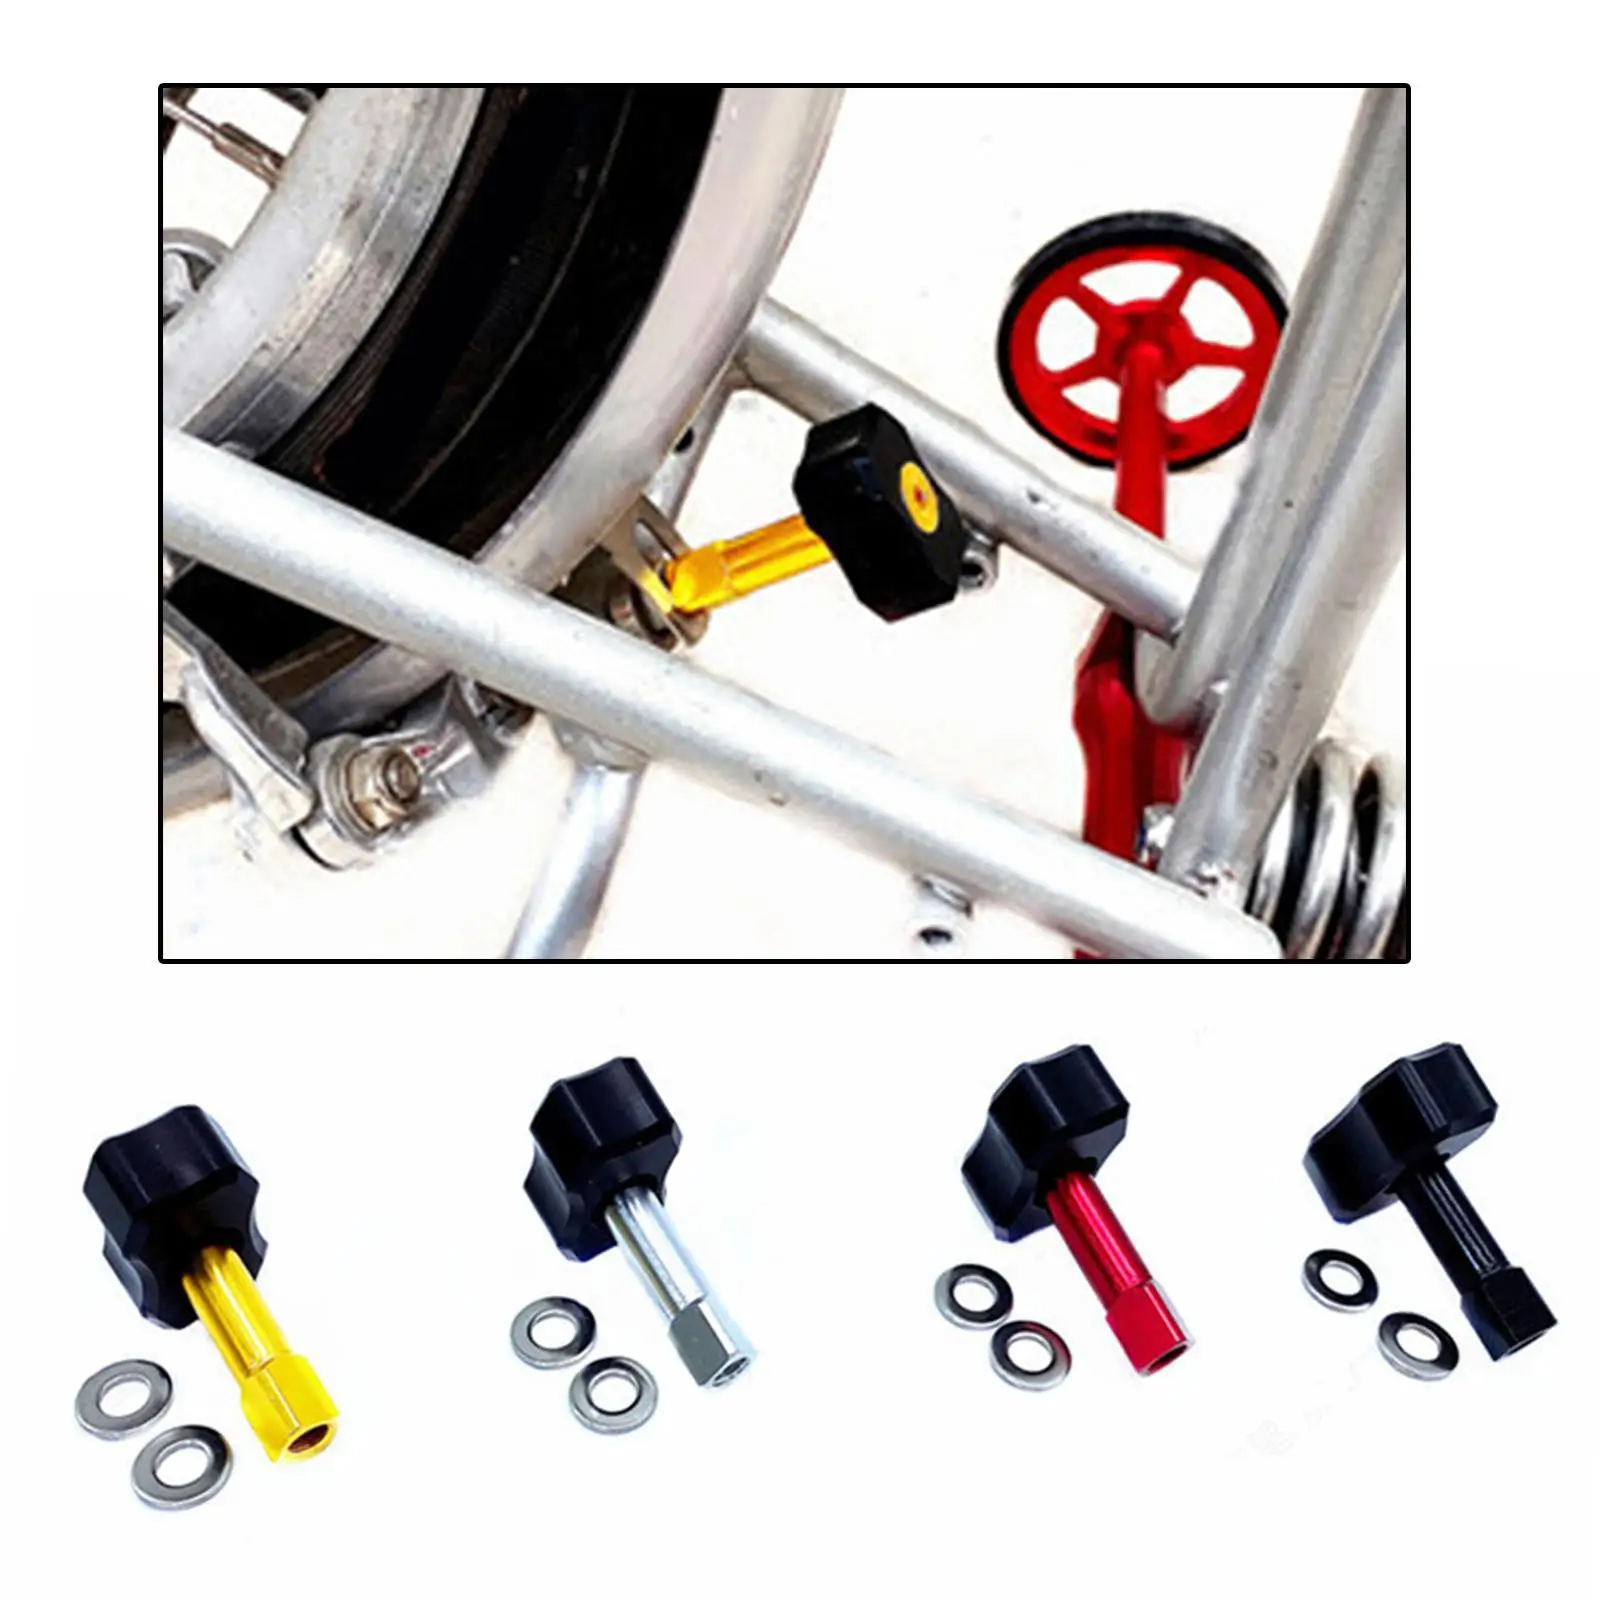 Bicycle Seatpost Stopper Folding Bike Parking Tray for  Parking